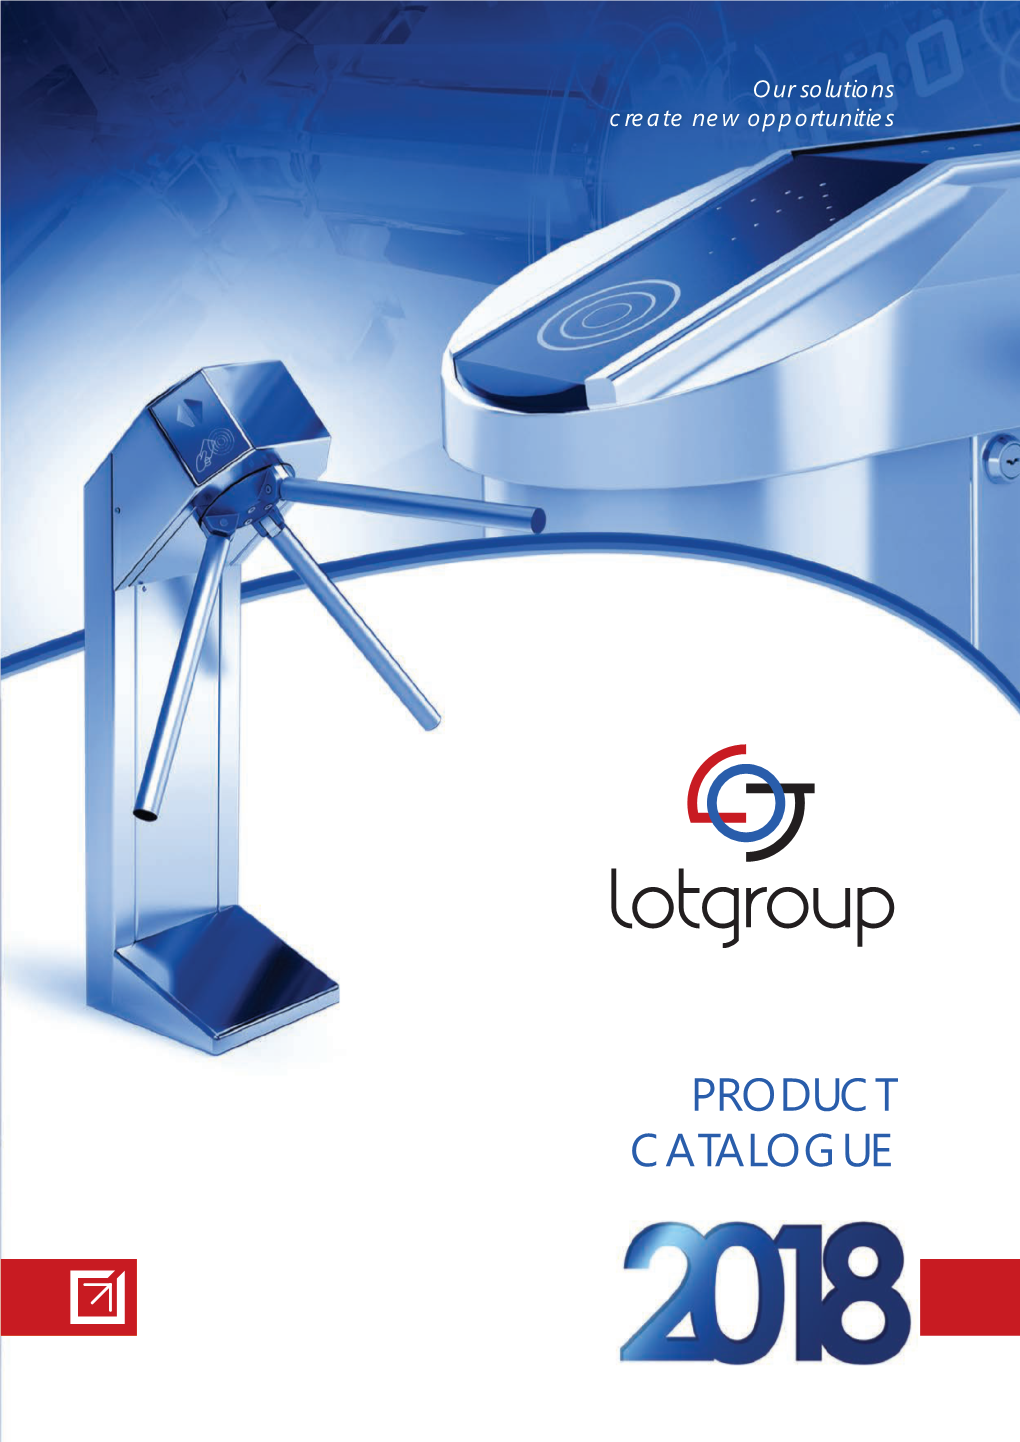 Product Catalogue Contents